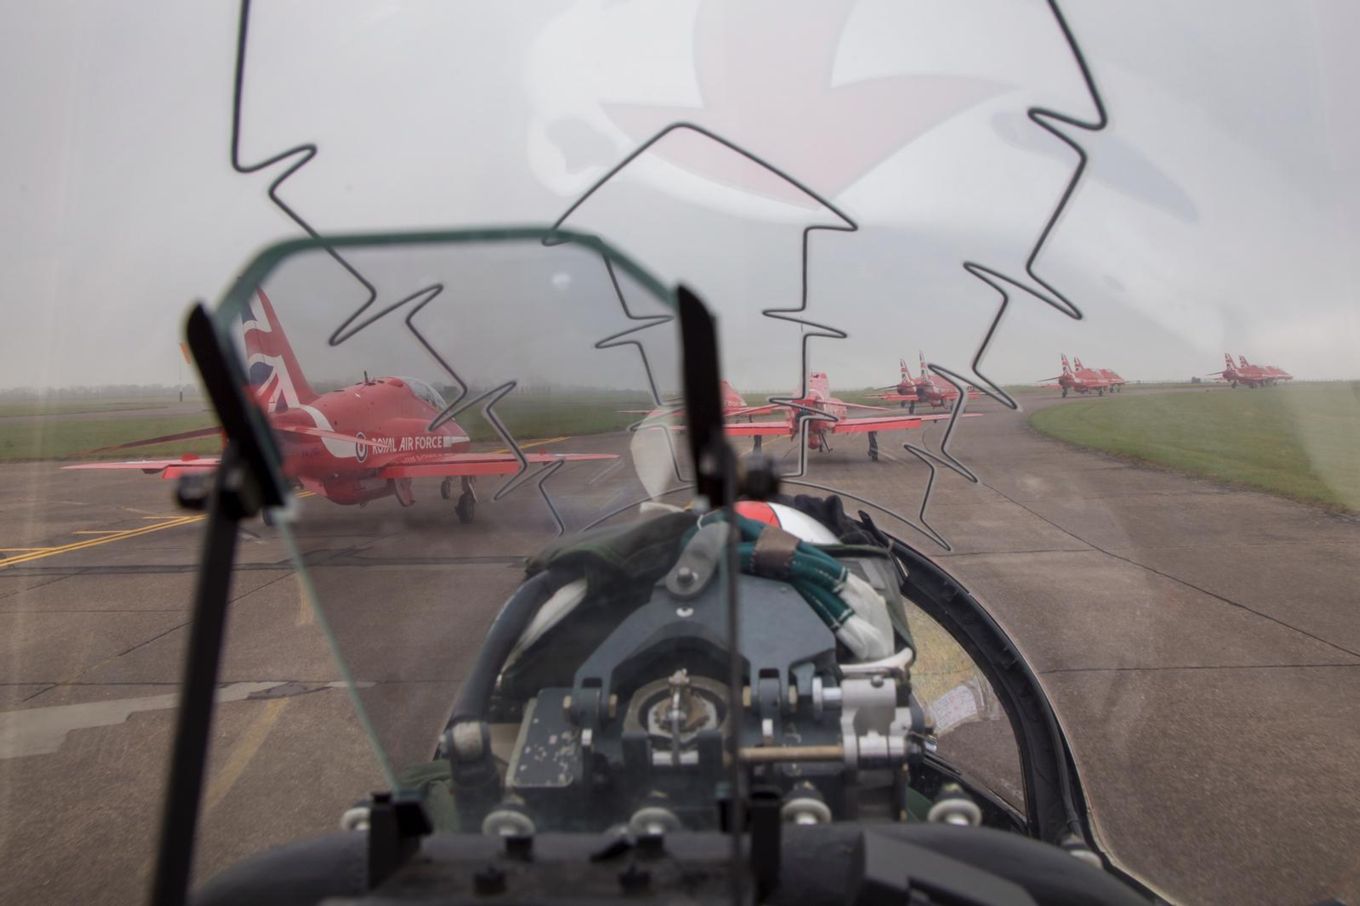 The Red Arrows departed RAF Scampton for pre-season training.